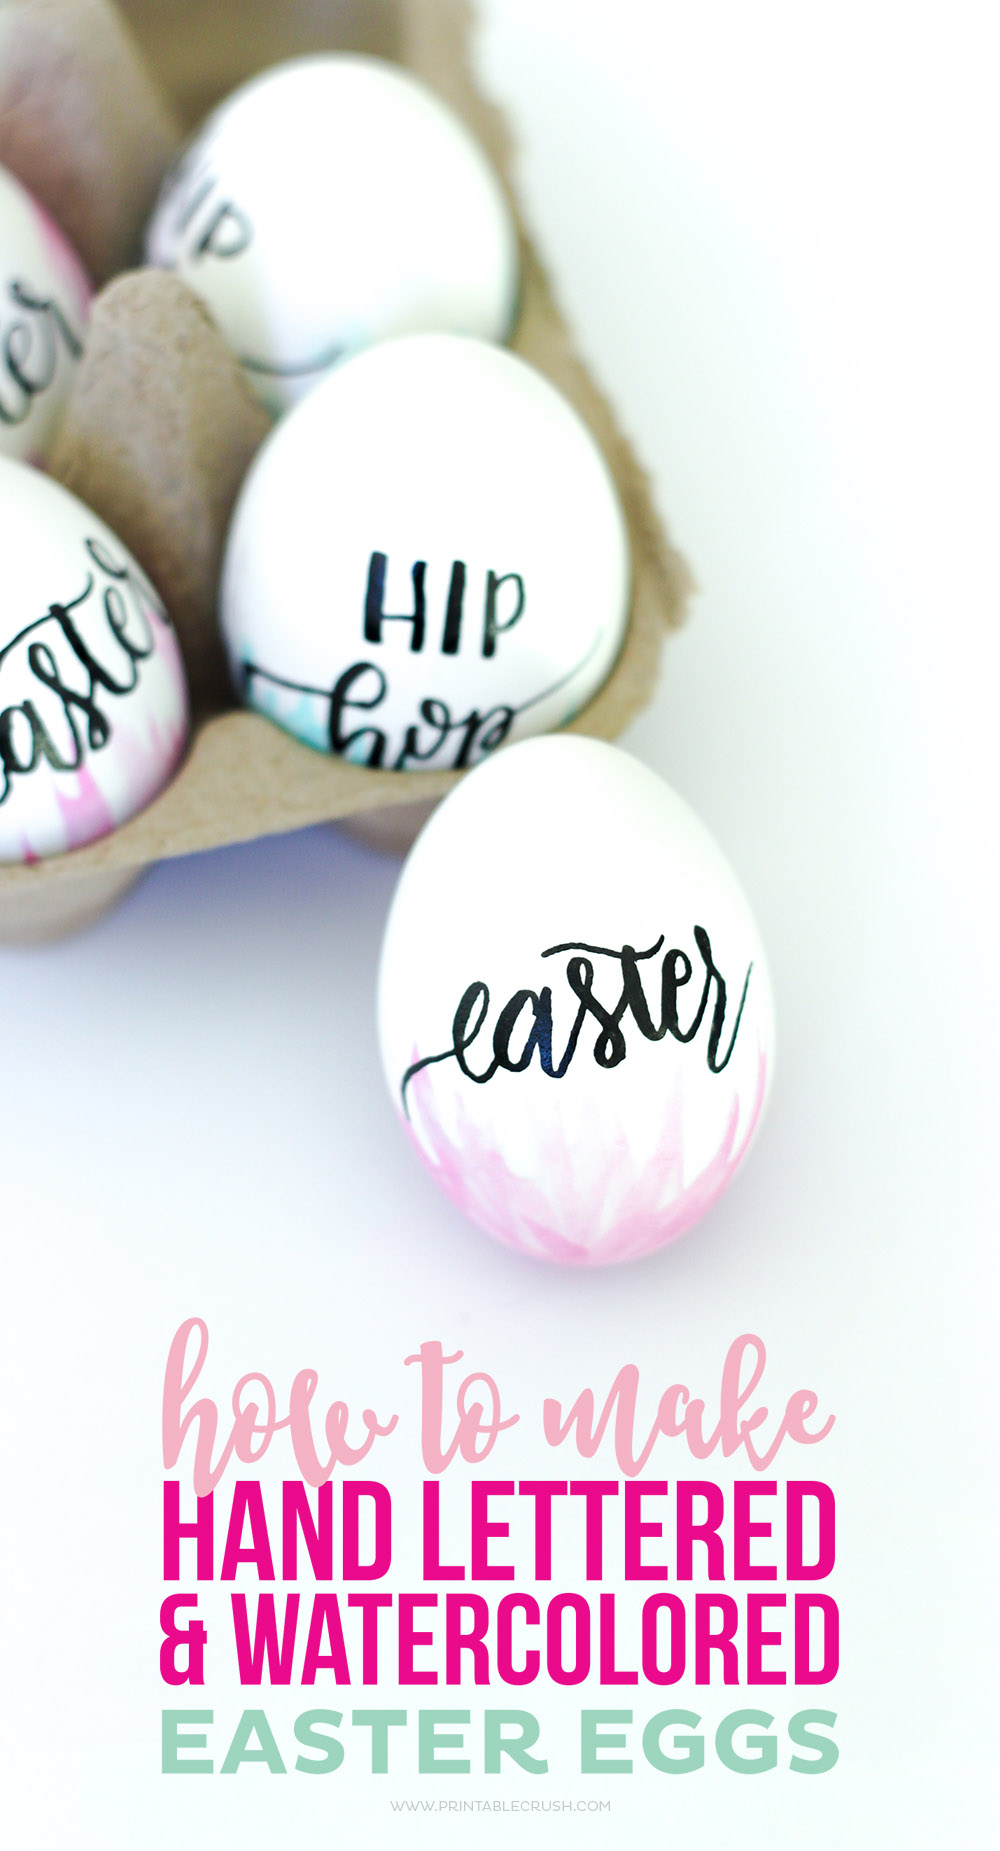 http://printablecrush.com/wp-content/uploads/2017/03/Hand-Lettered-and-Watercolor-Easter-Eggs-12-copy.jpg